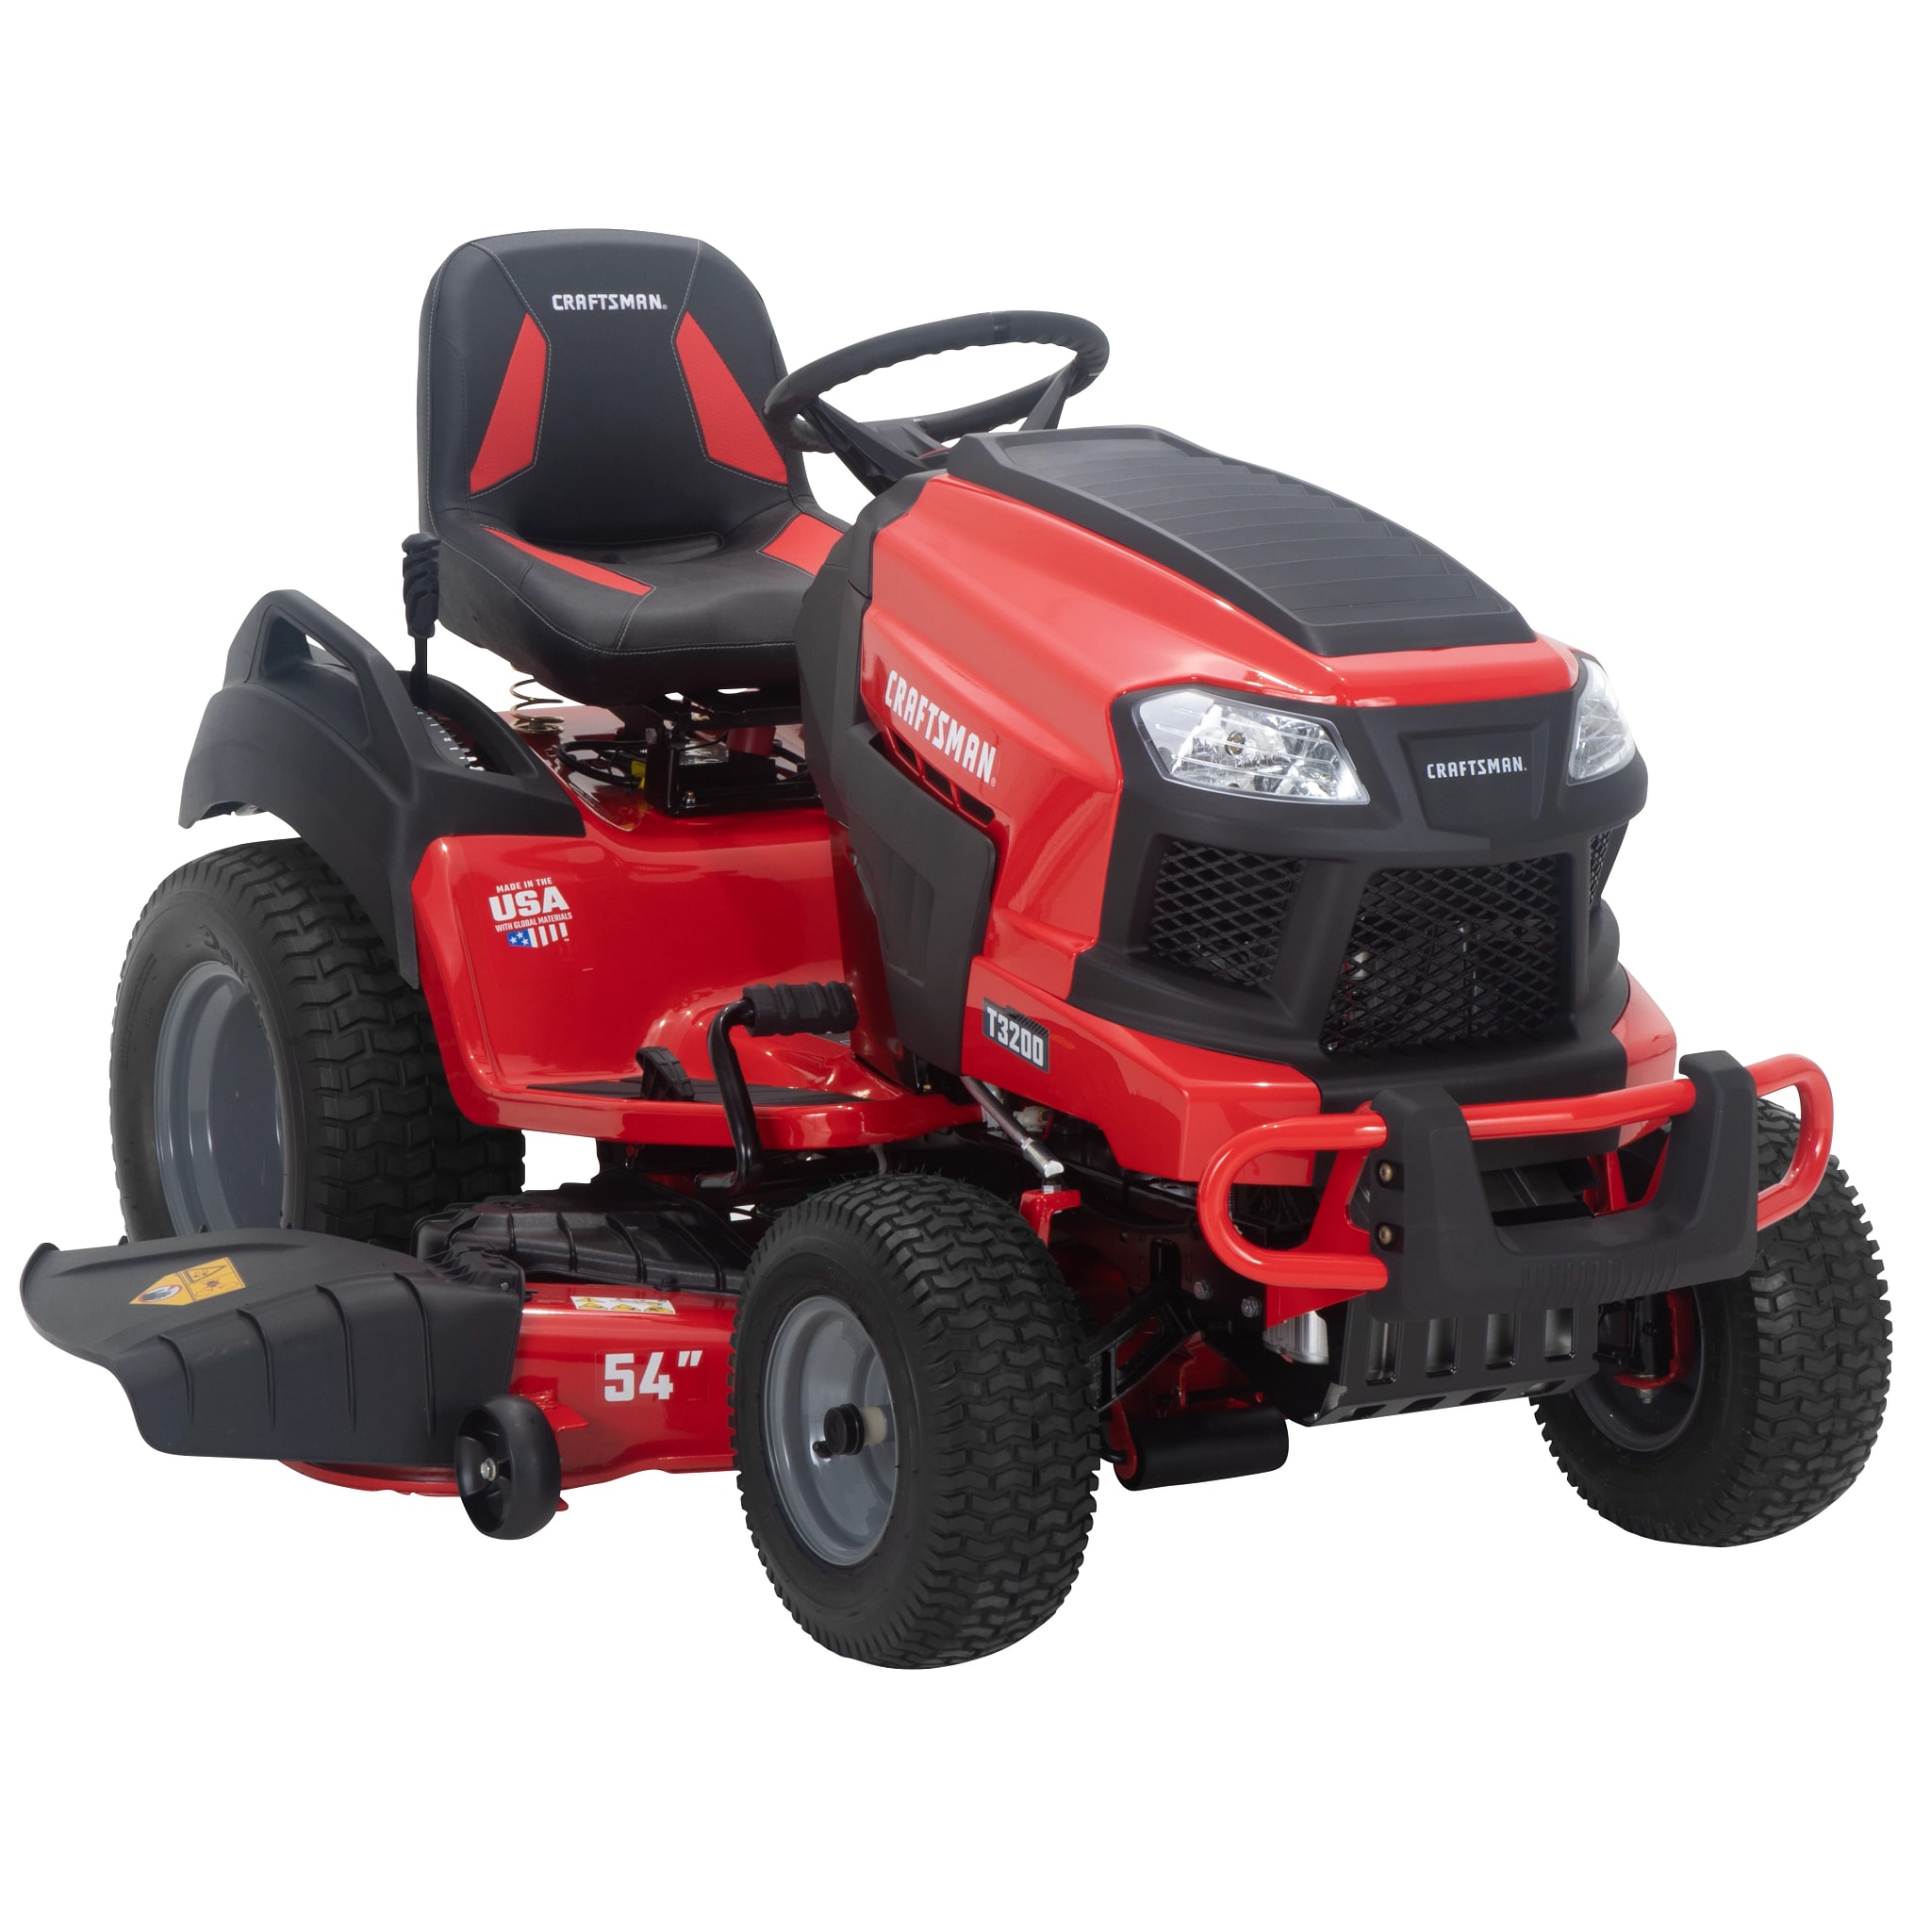 CRAFTSMAN T100 Manual/Gear 36-in Riding Lawn Mower With Mulching ...